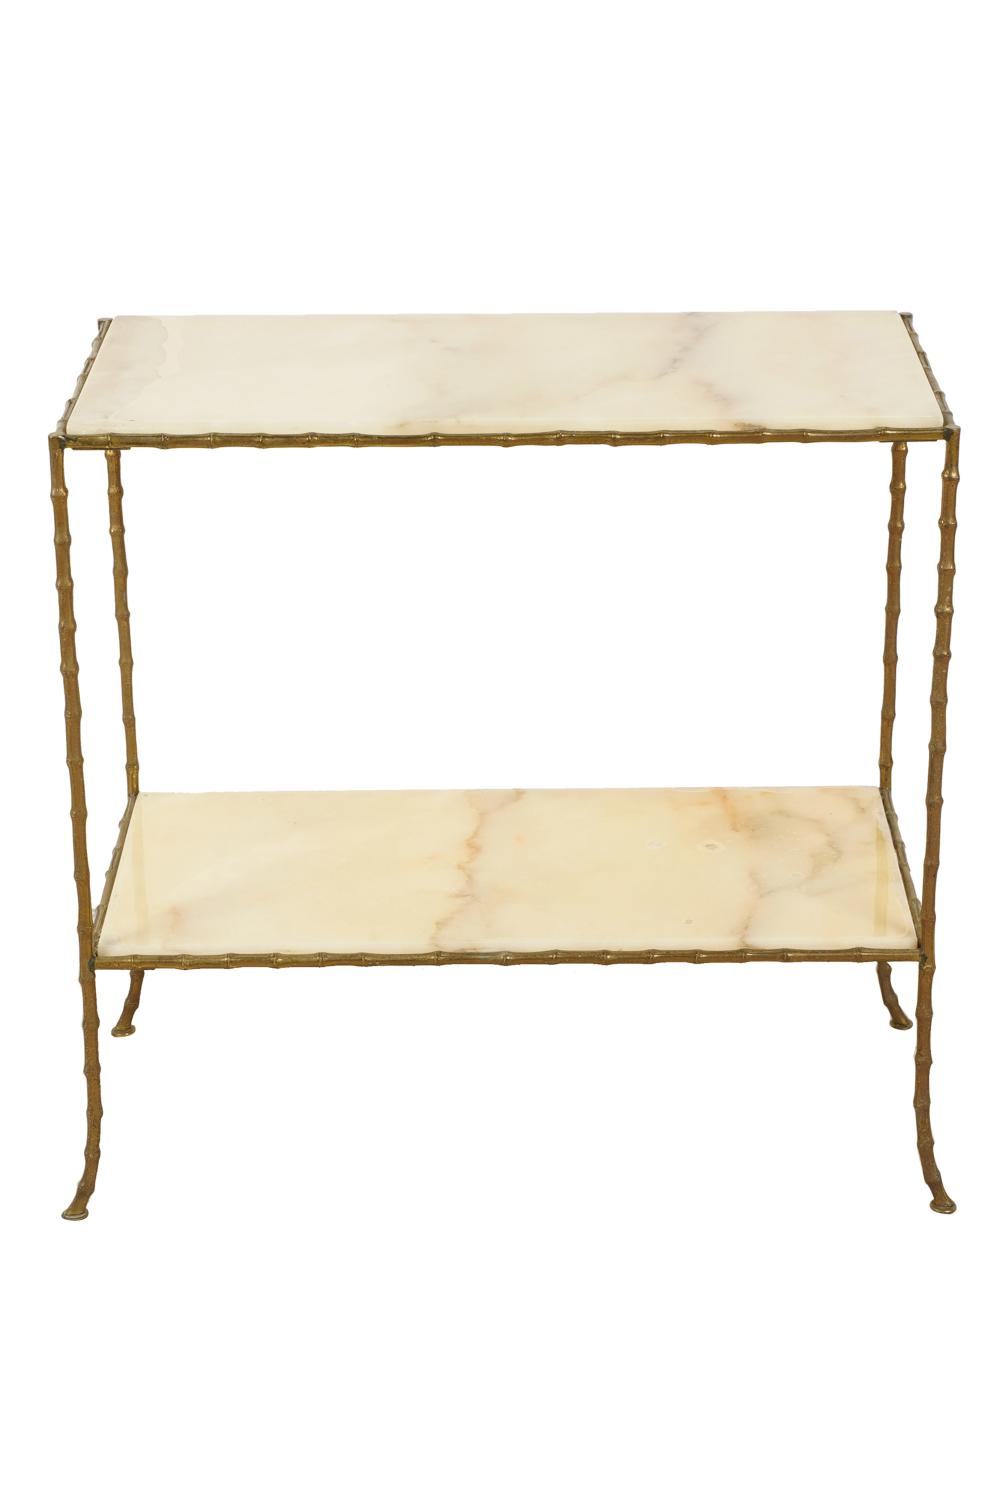 ONYX BRASS FAUX BAMBOO TIERED 333795